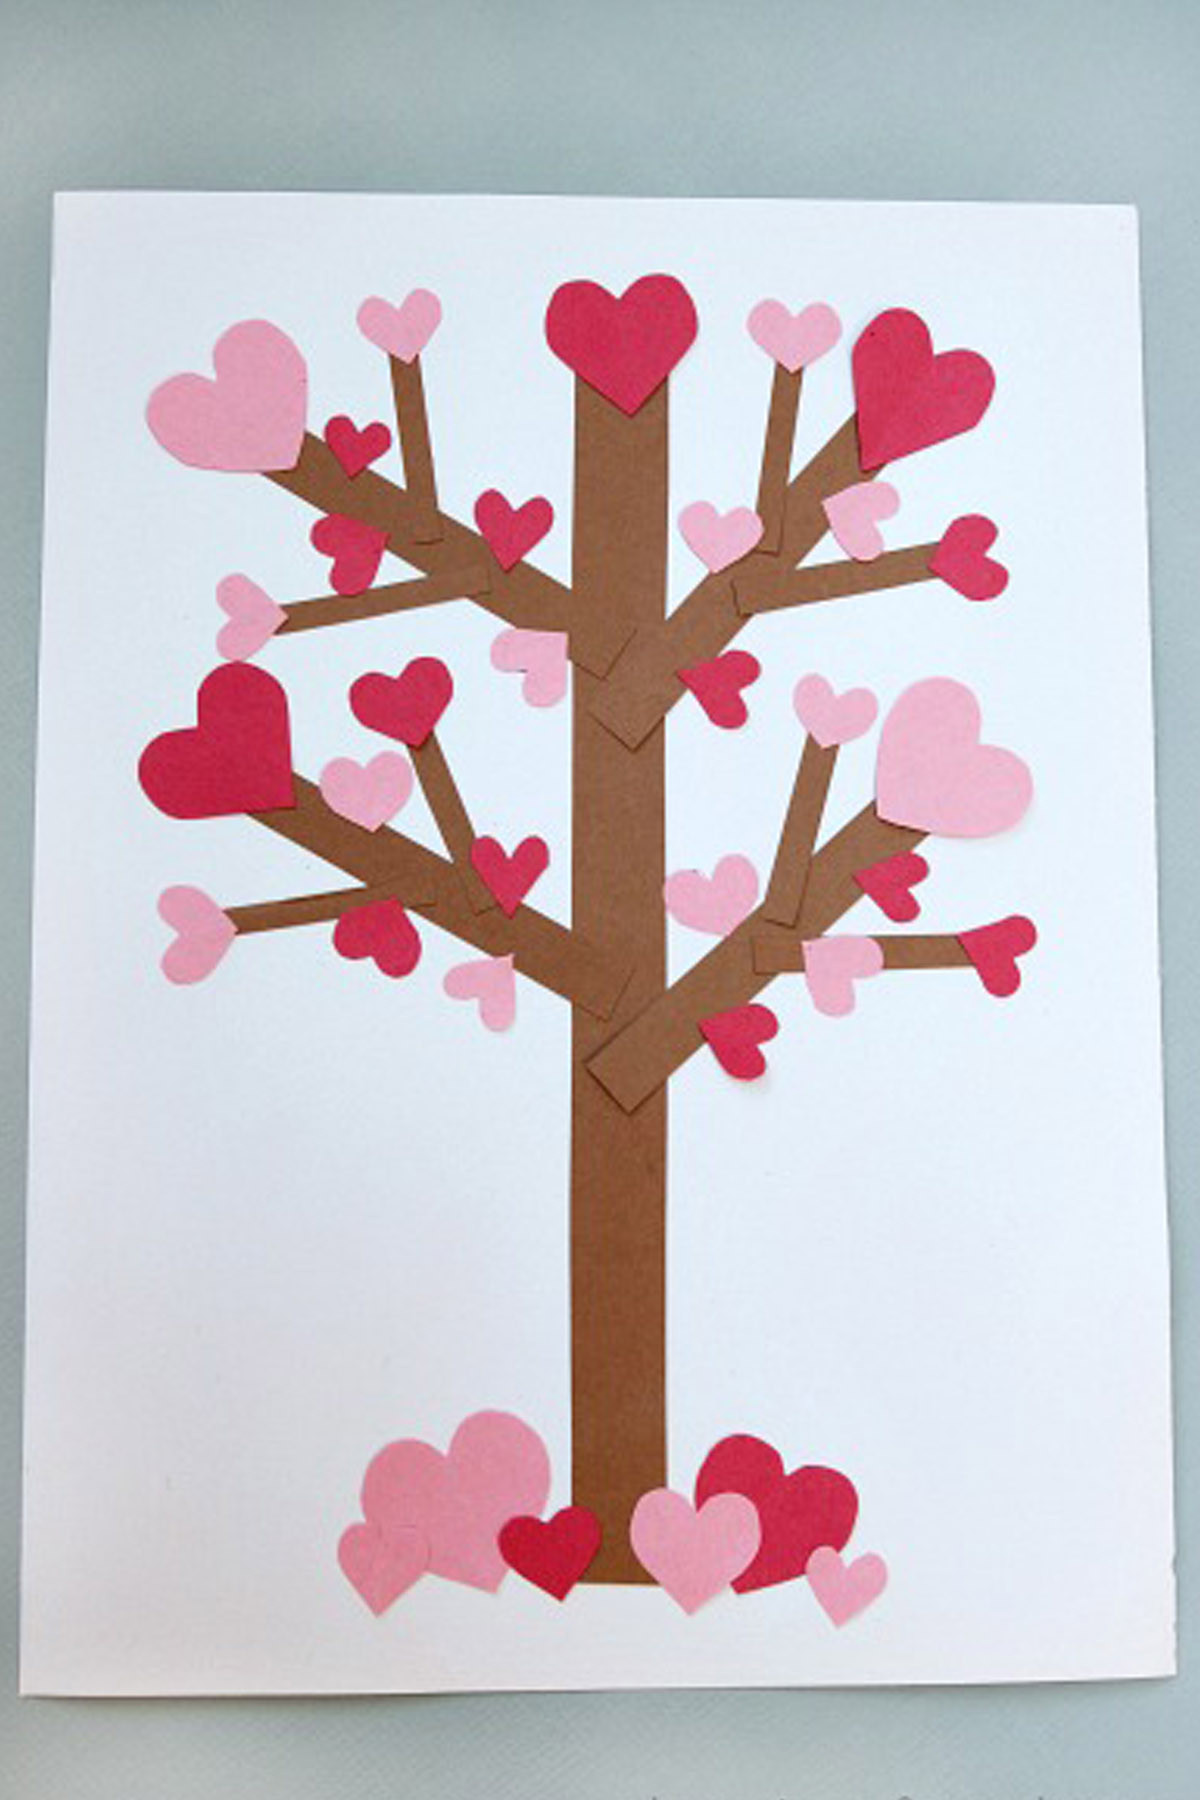 Arts And Crafts Valentines Gift Ideas
 20 Valentine s Day Crafts for Kids Fun Heart Arts and